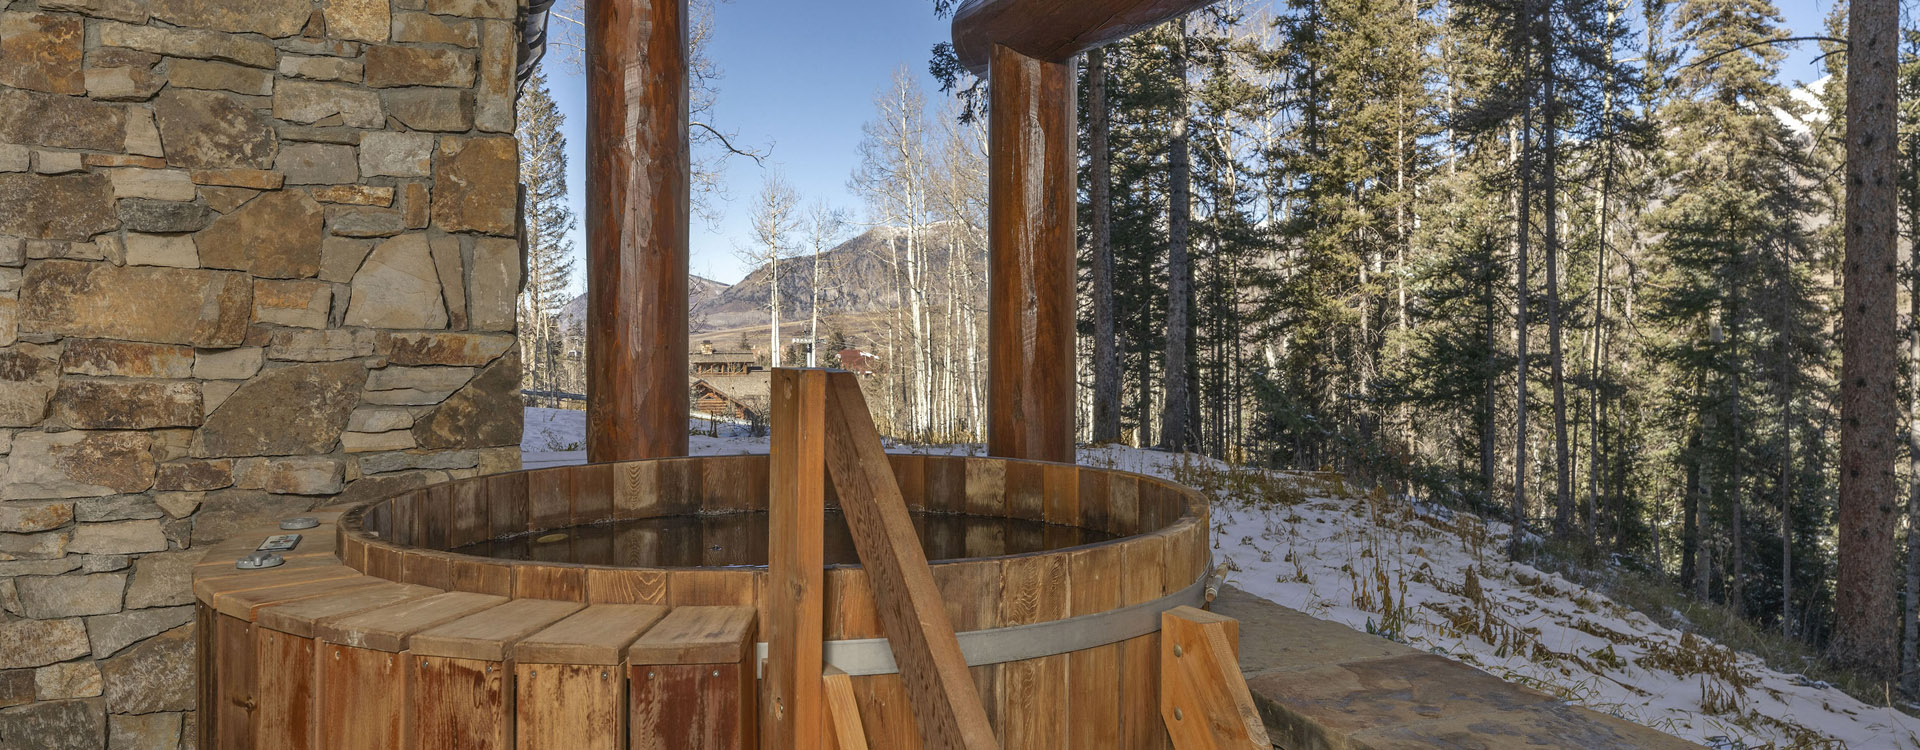 8.01-Mountain-Village-Vacation-Happy-Place-Hot-Tub